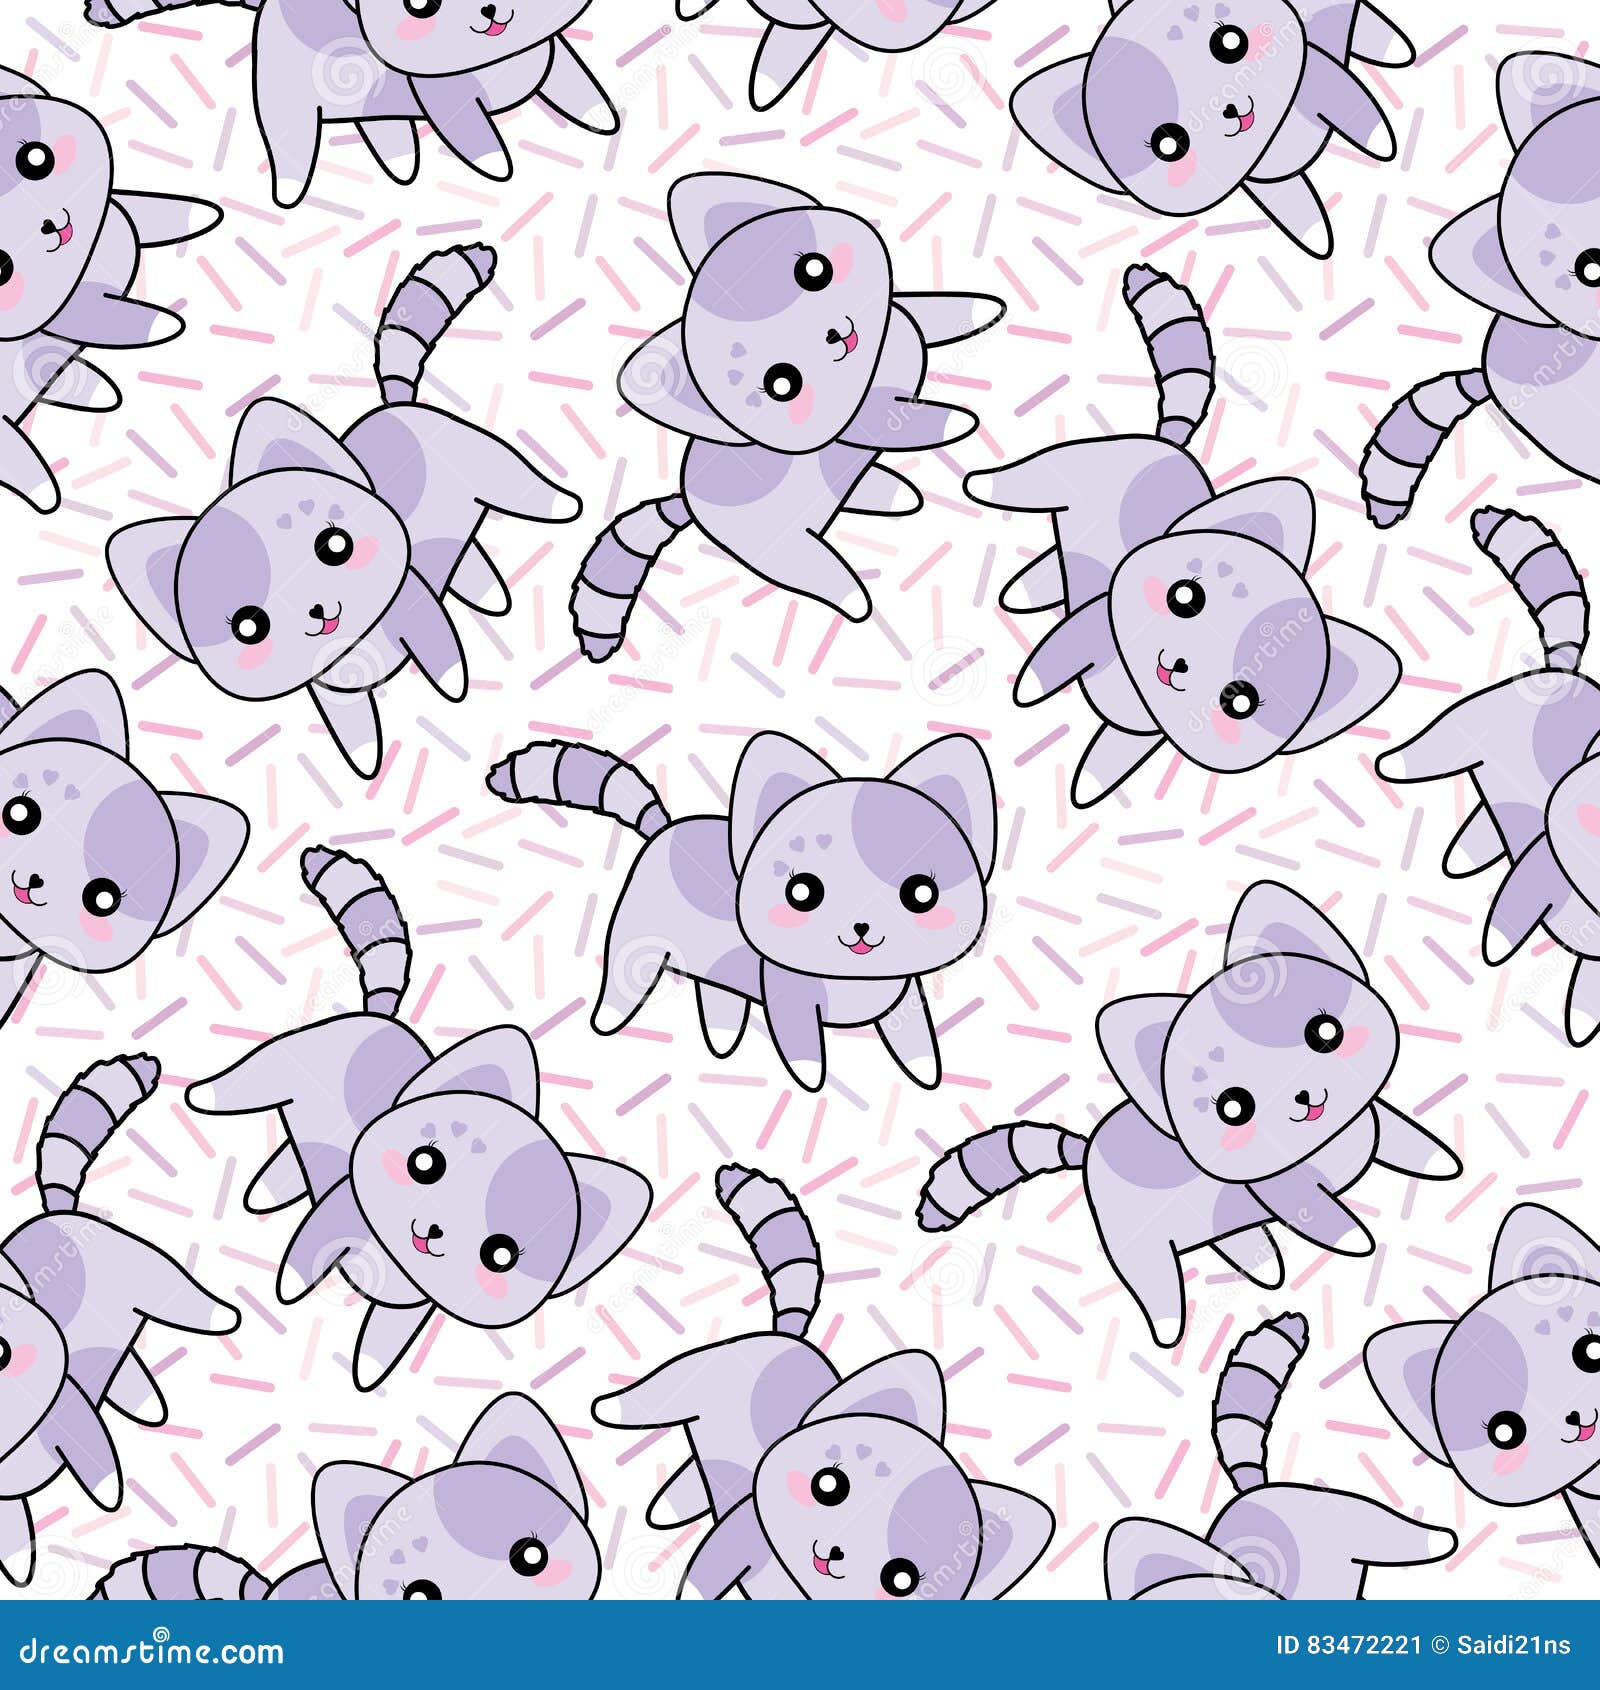 Seamless Background of Animal Illustration with Cute Purple Cats on ...